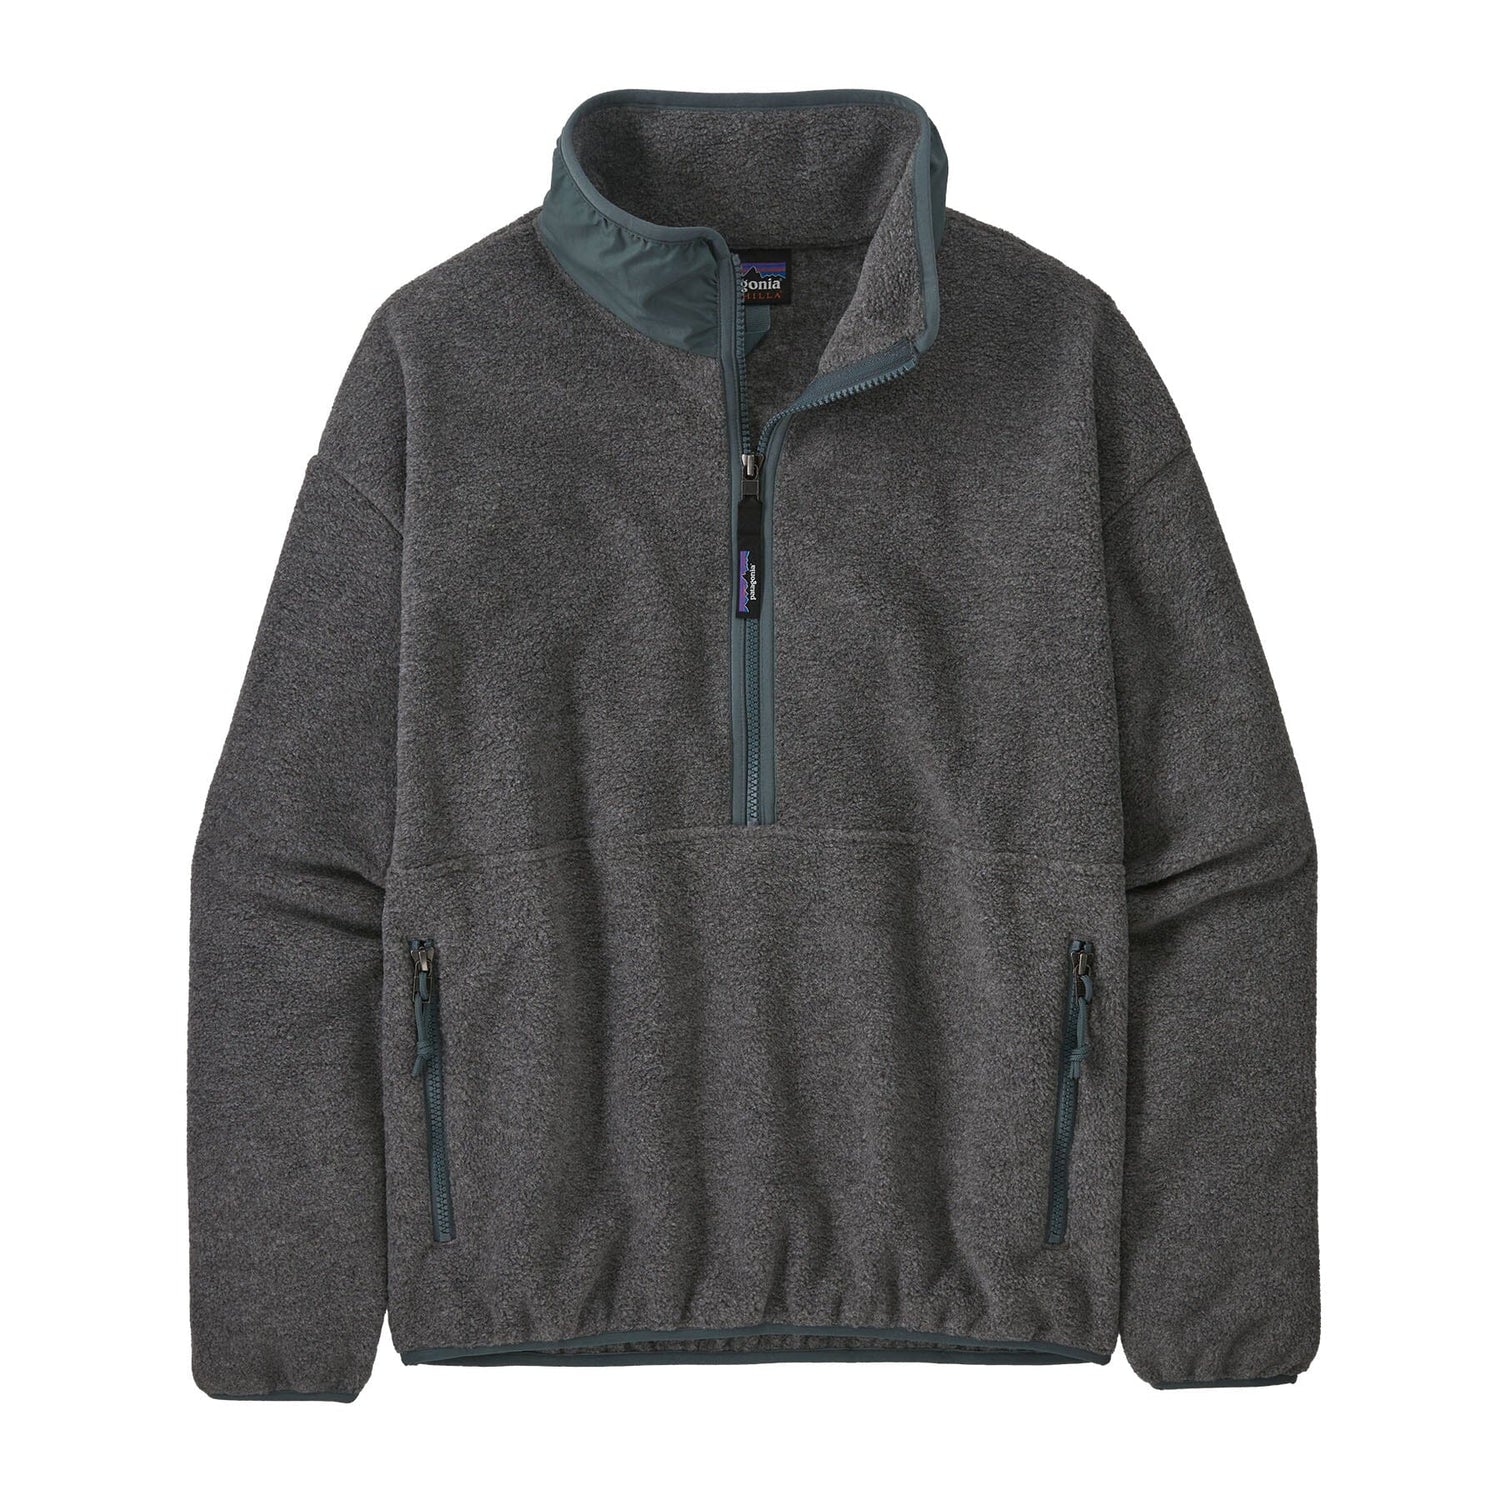 Patagonia W's Synch Fleece Marsupial - 100% Recycled Polyester Nickel w/Nouveau Green Shirt